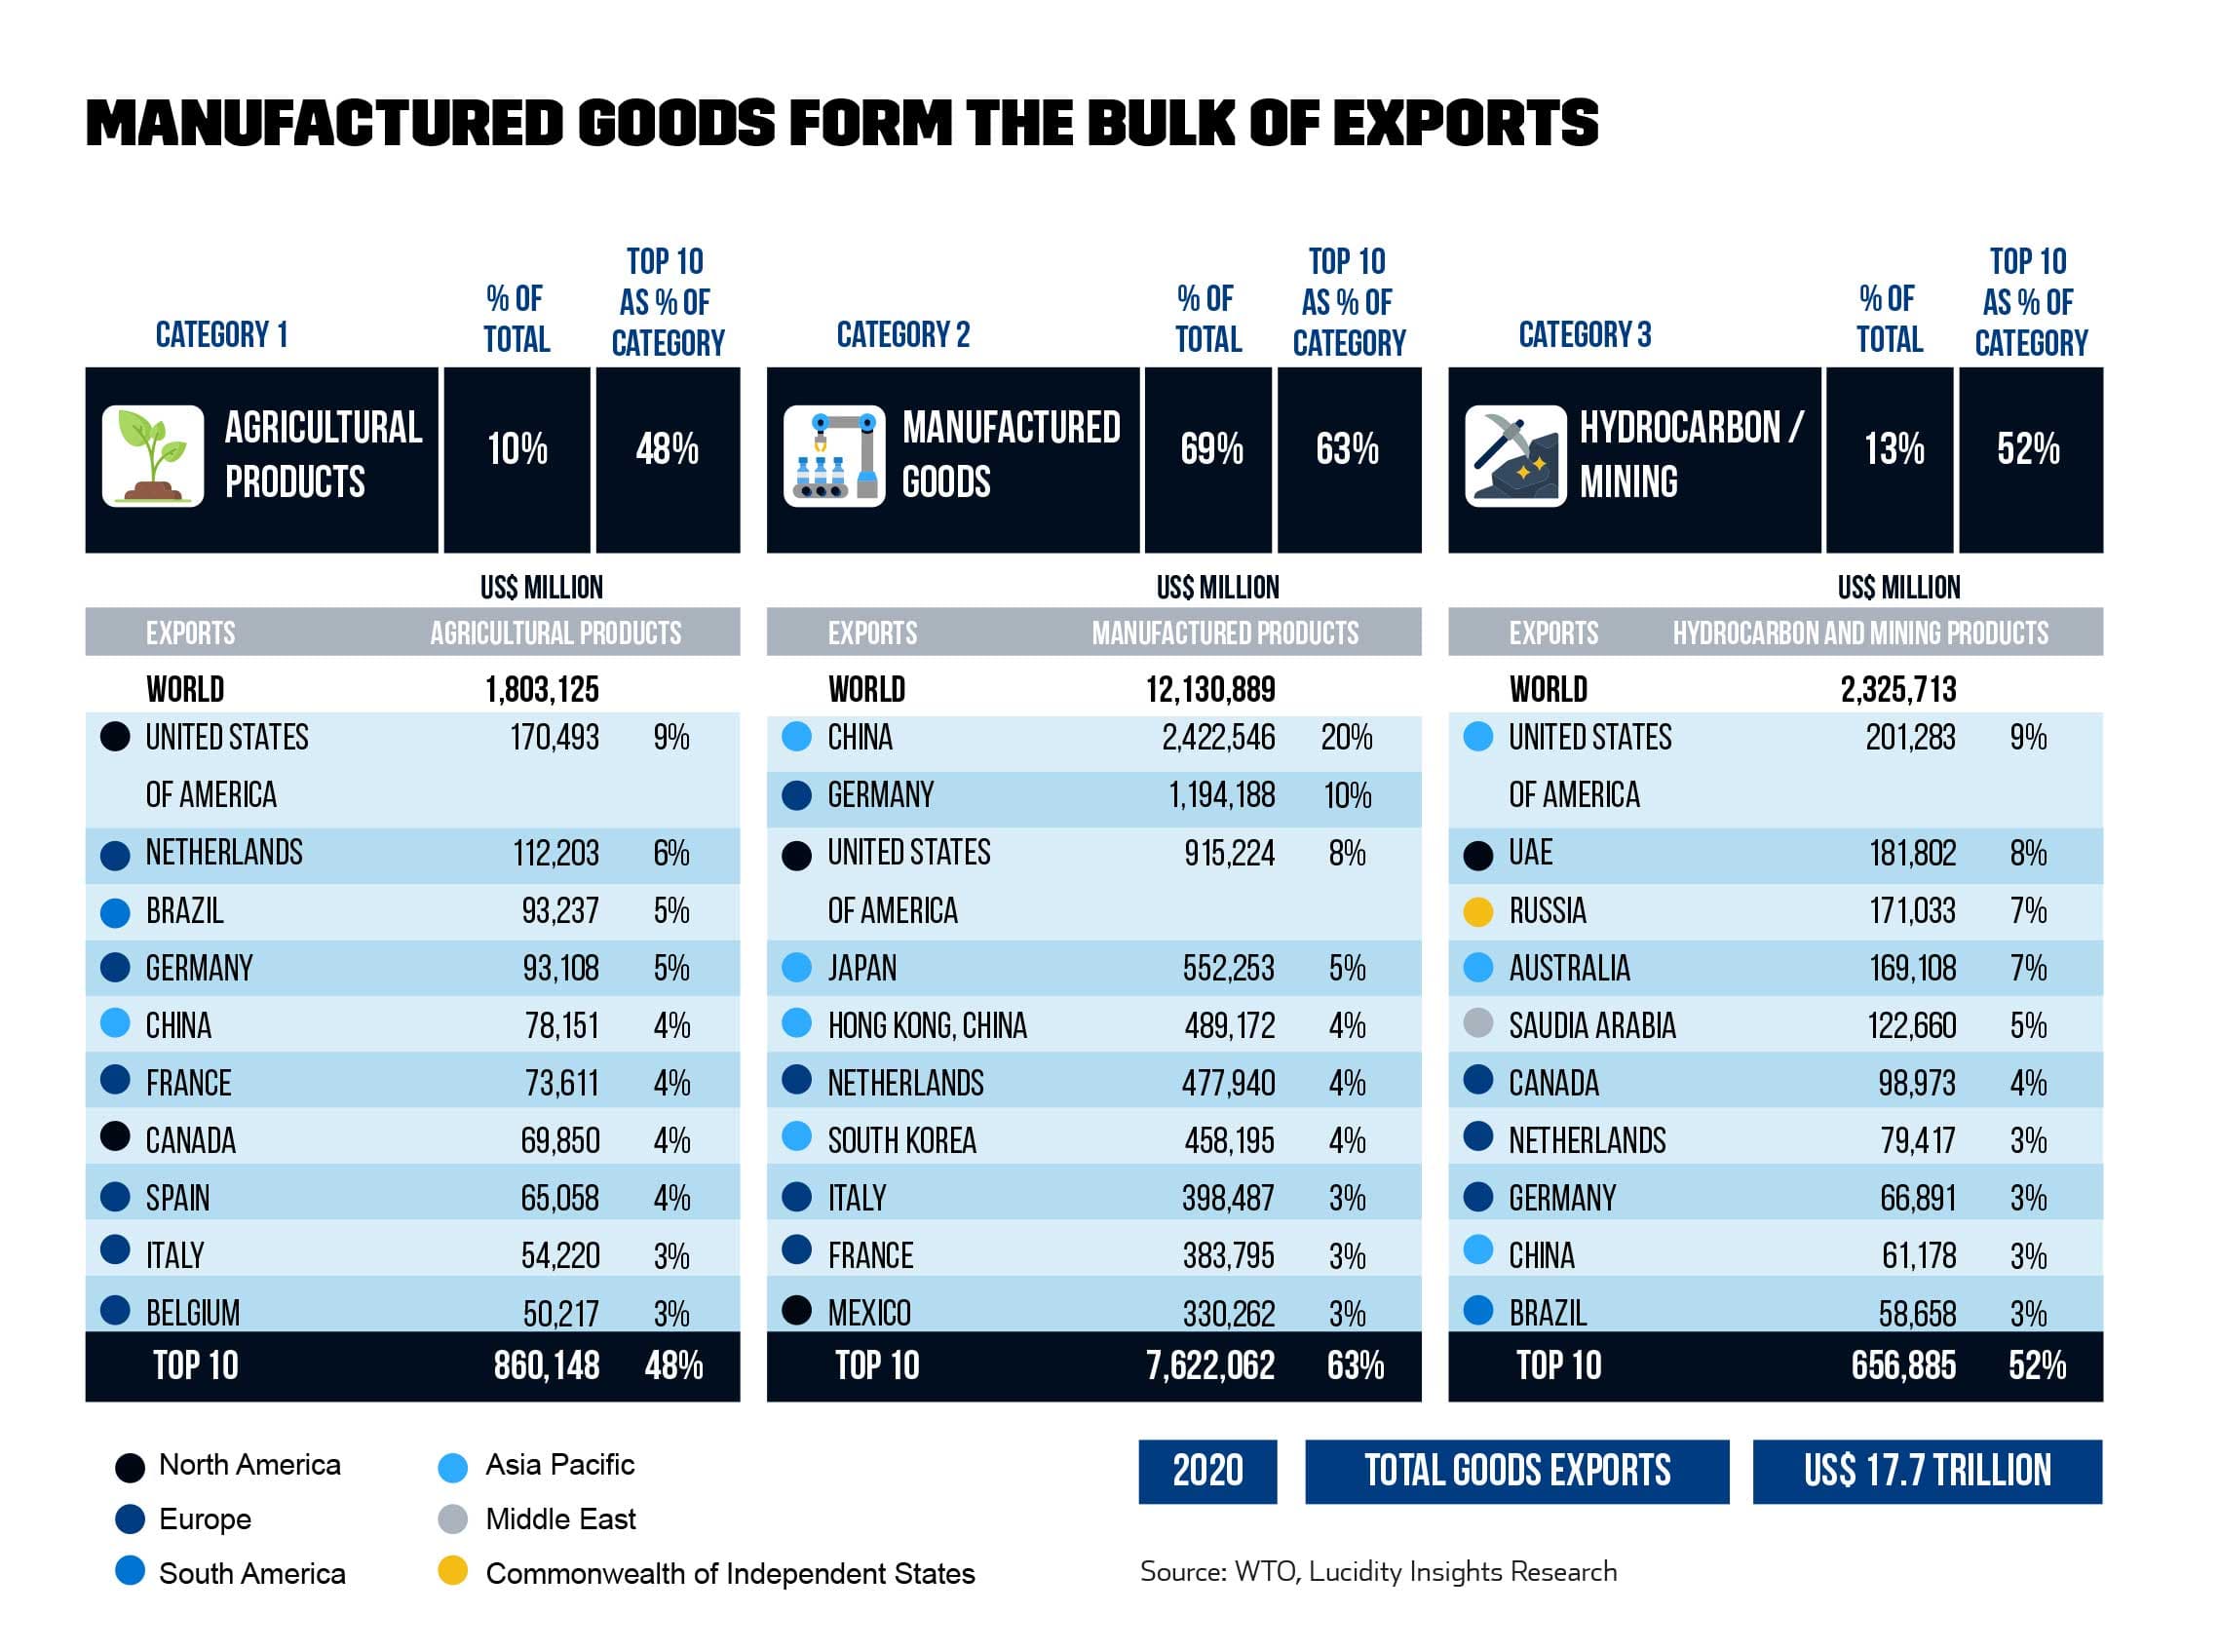 Manufactured Goods Form the Bulk of Exports